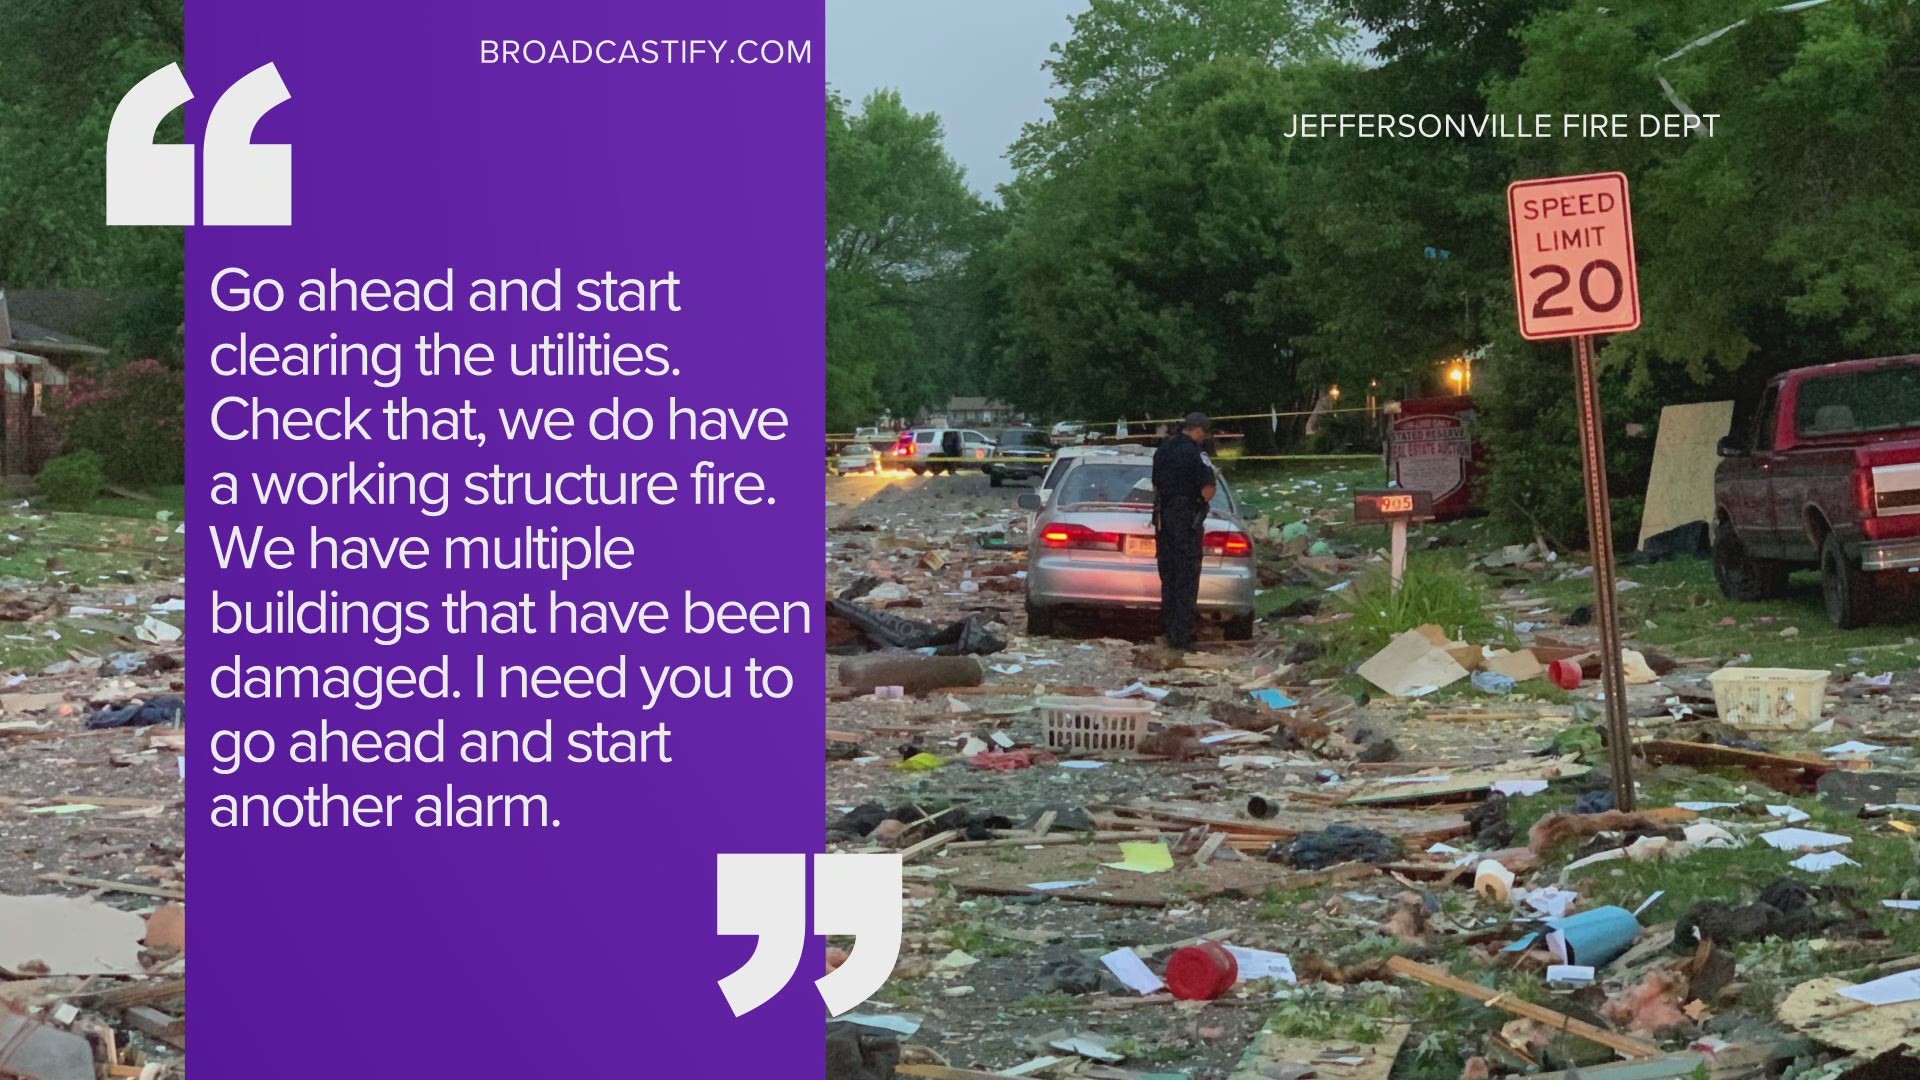 Part 5 of audio release of a 911 call following a house explosion in Jeffersonville, Indiana.